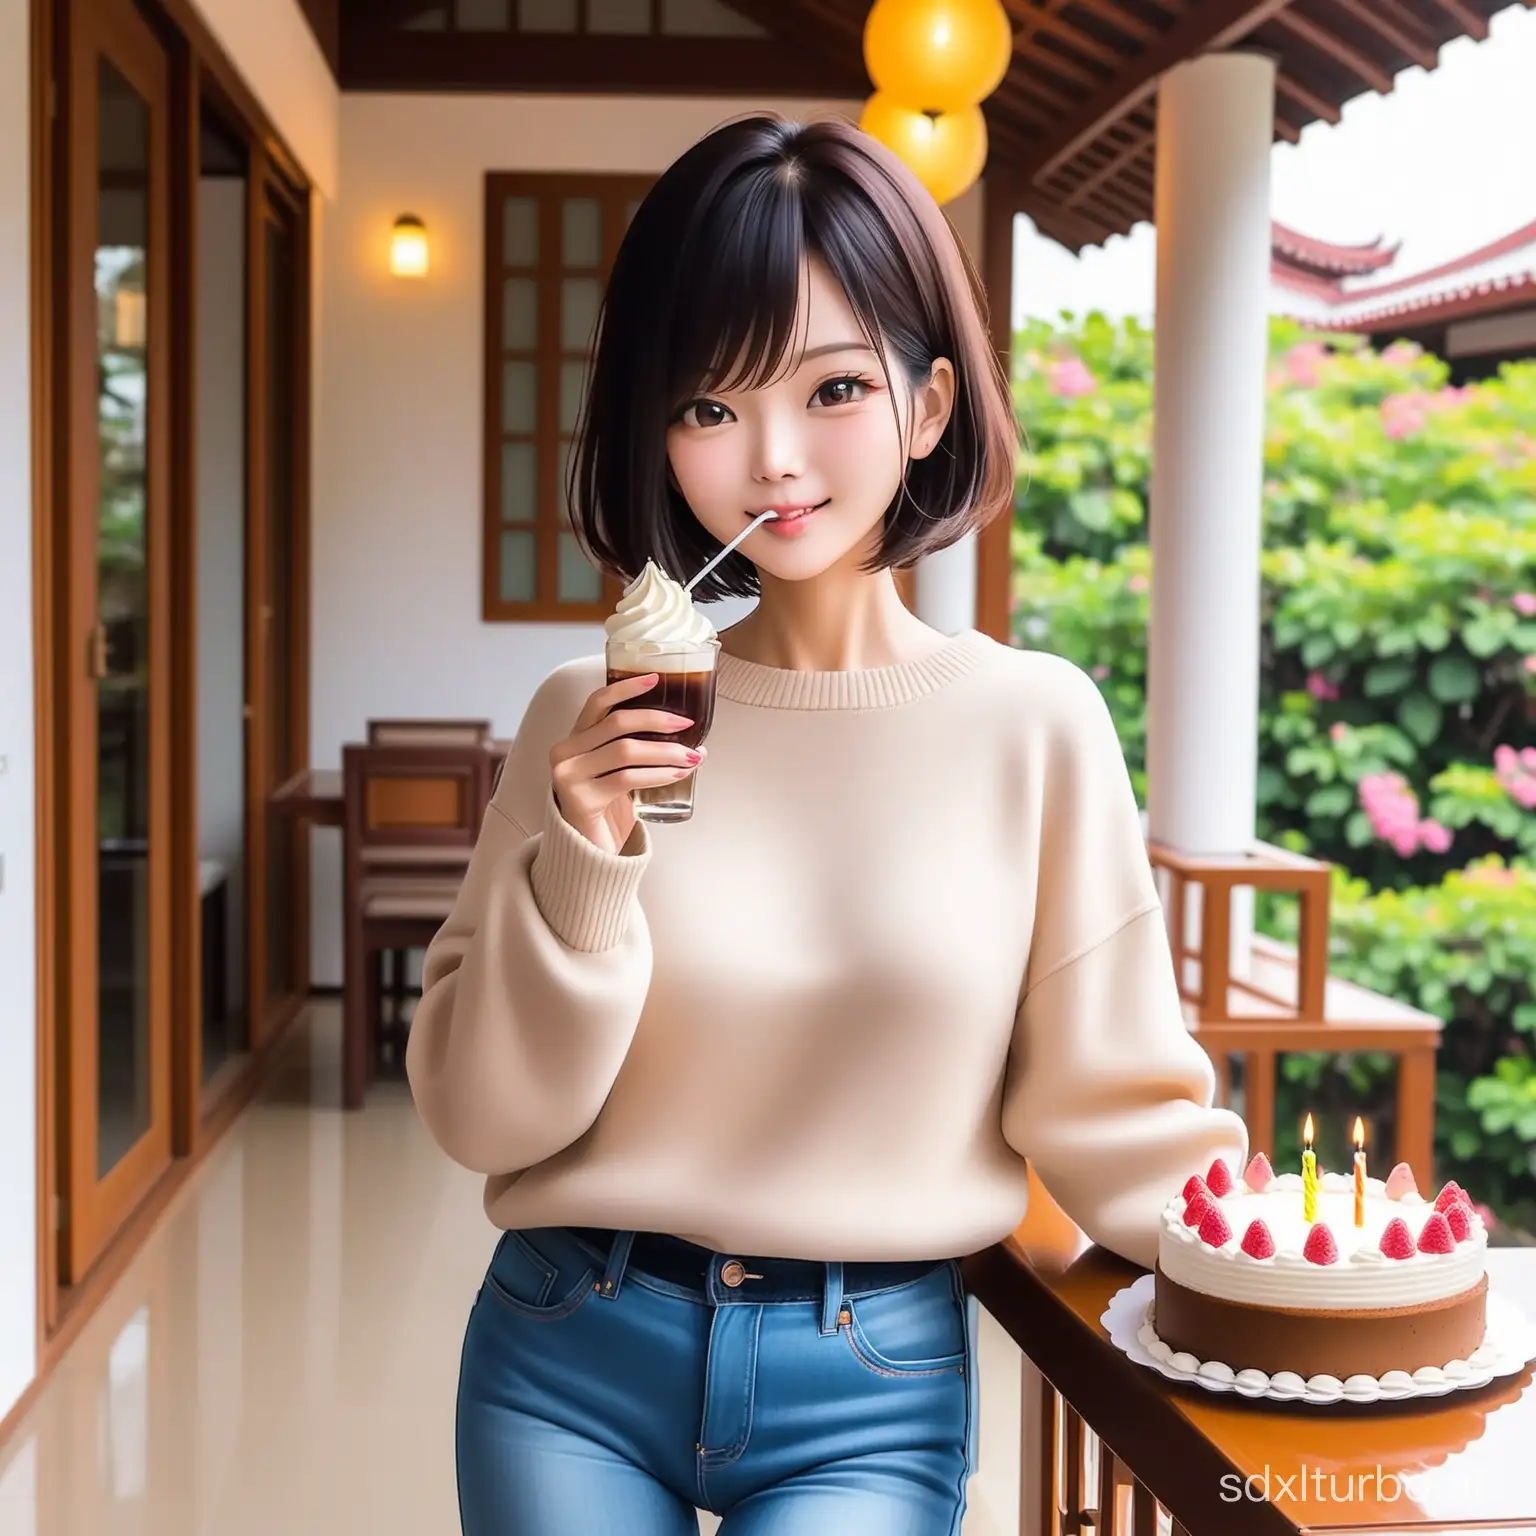 Celebrating-Birthday-with-Cake-Taiwanese-Woman-in-Sweater-and-Jeans-at-Villa